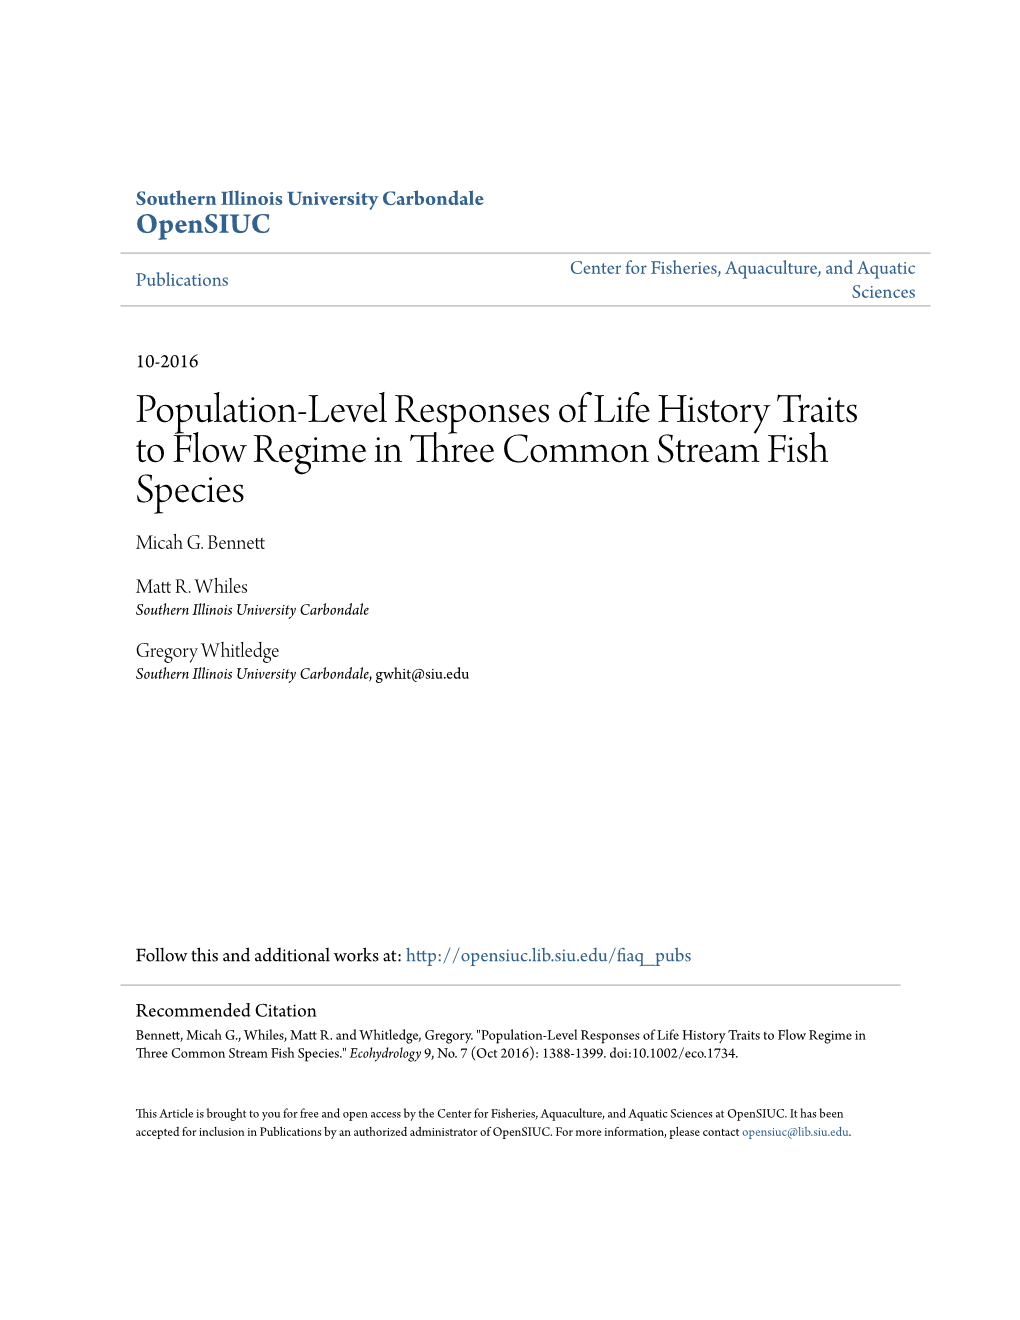 Population-Level Responses of Life History Traits to Flow Regime in Three Common Stream Fish Species Micah G